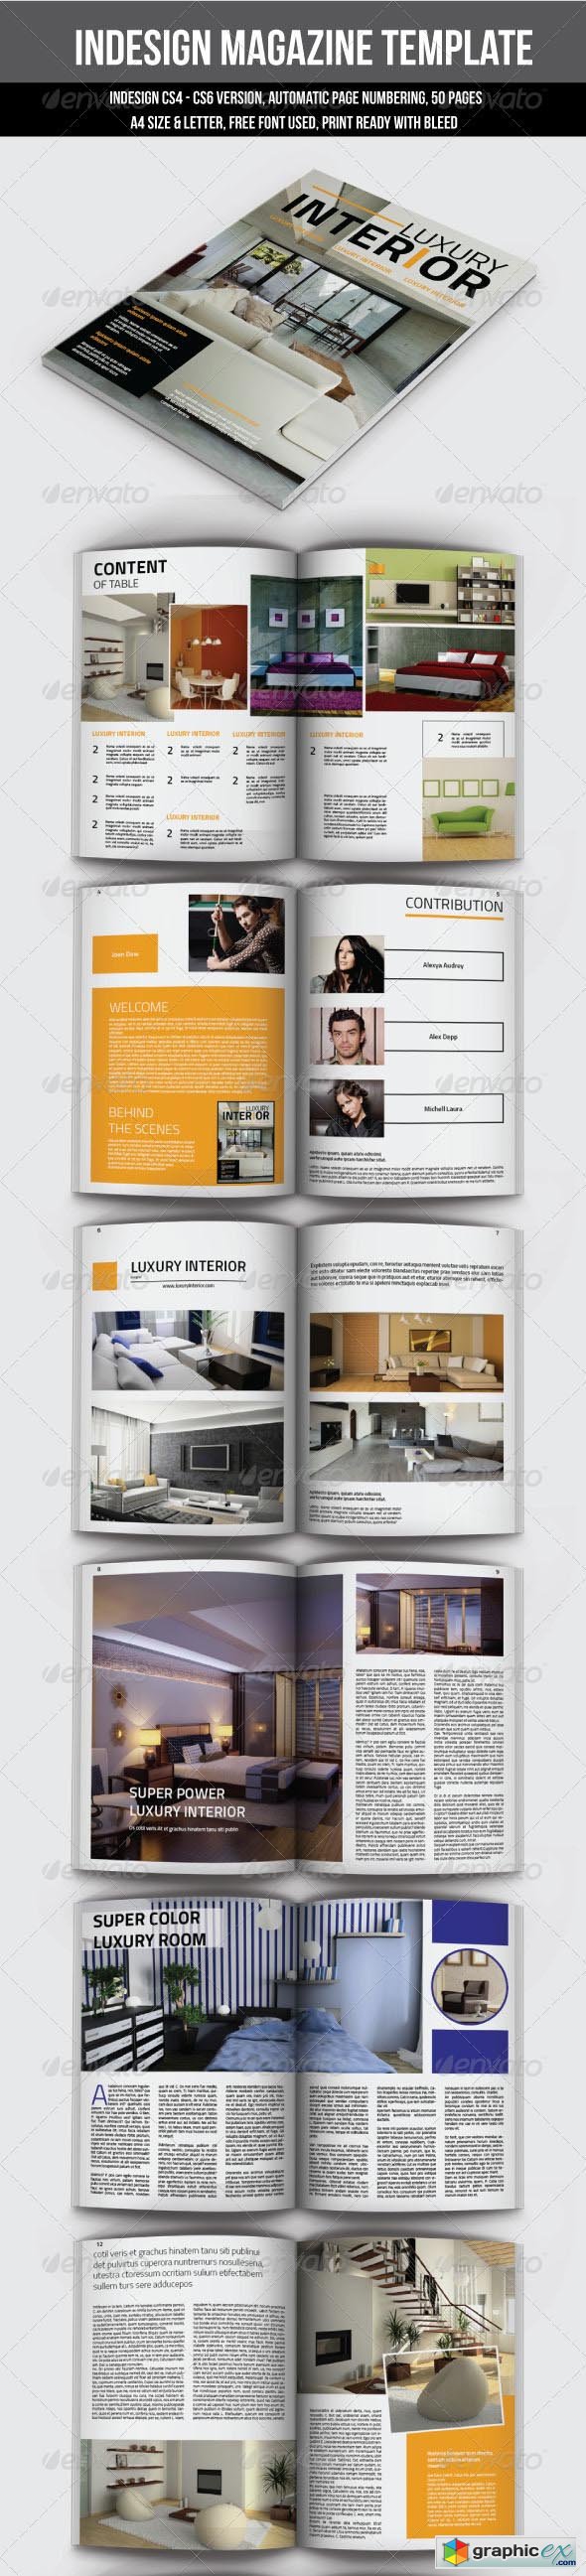 Indesign Magazine Template 50 Page